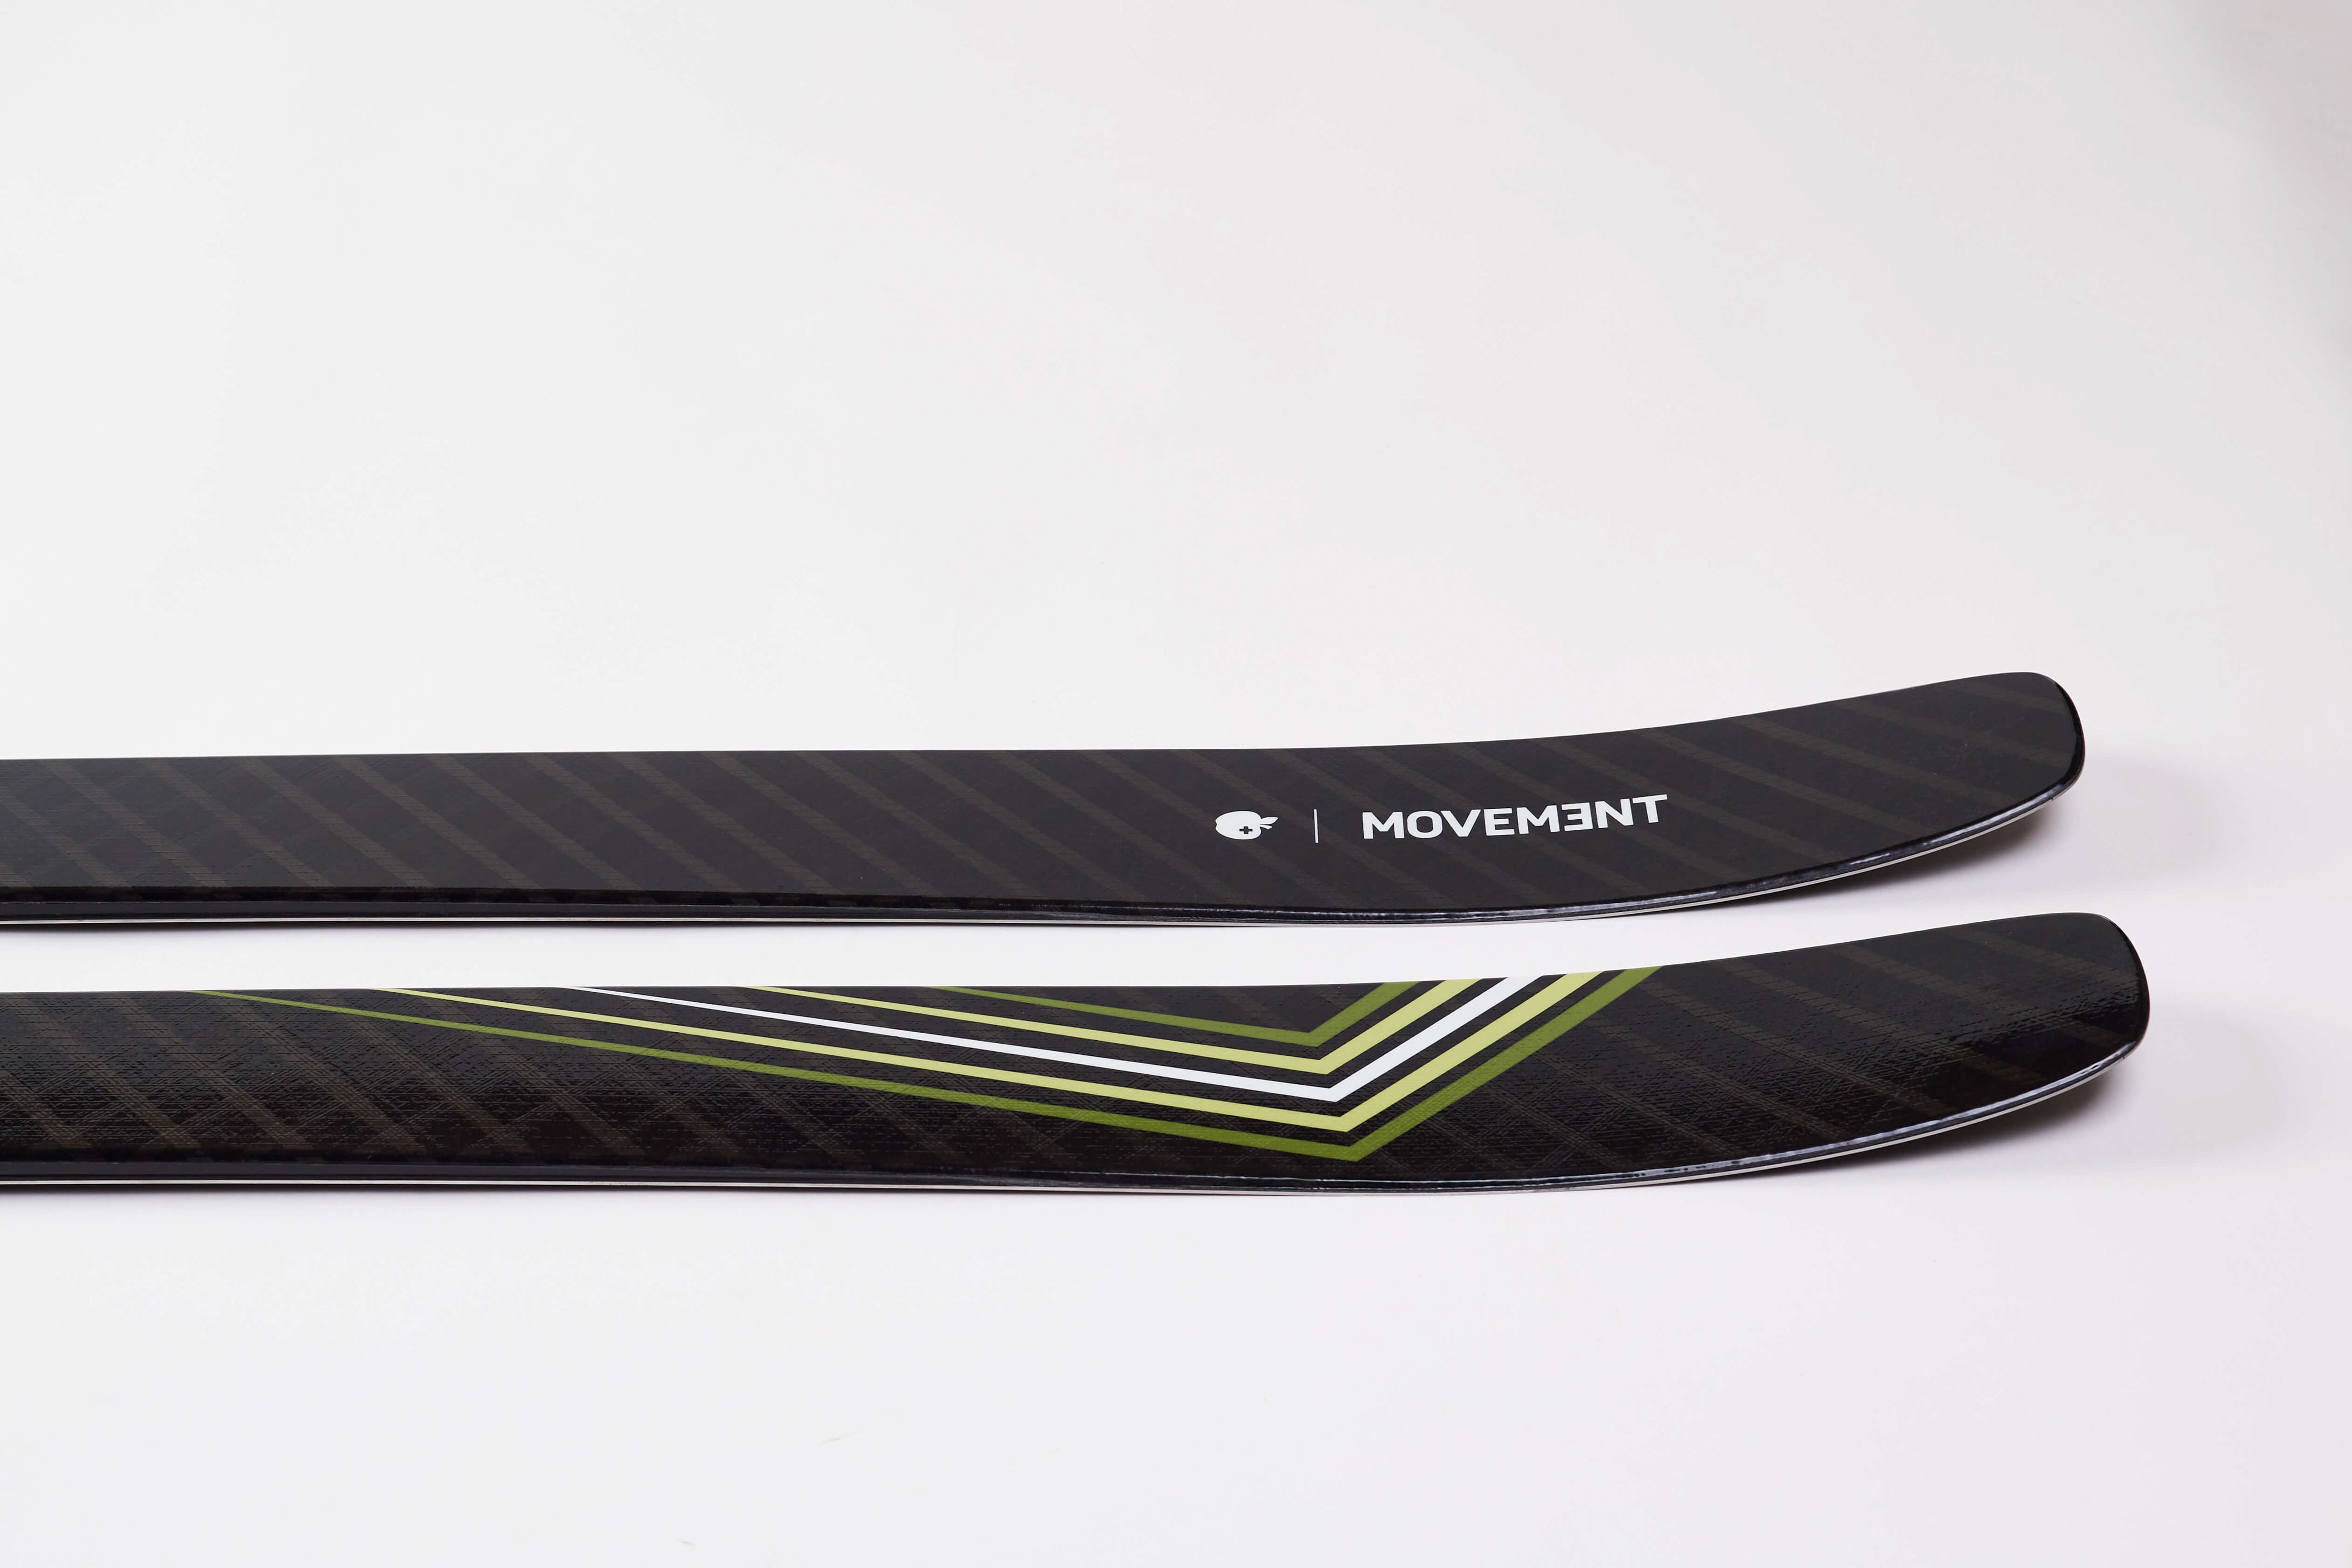 Experience Movement's touring excellence with the Alp Tracks 106 skis.